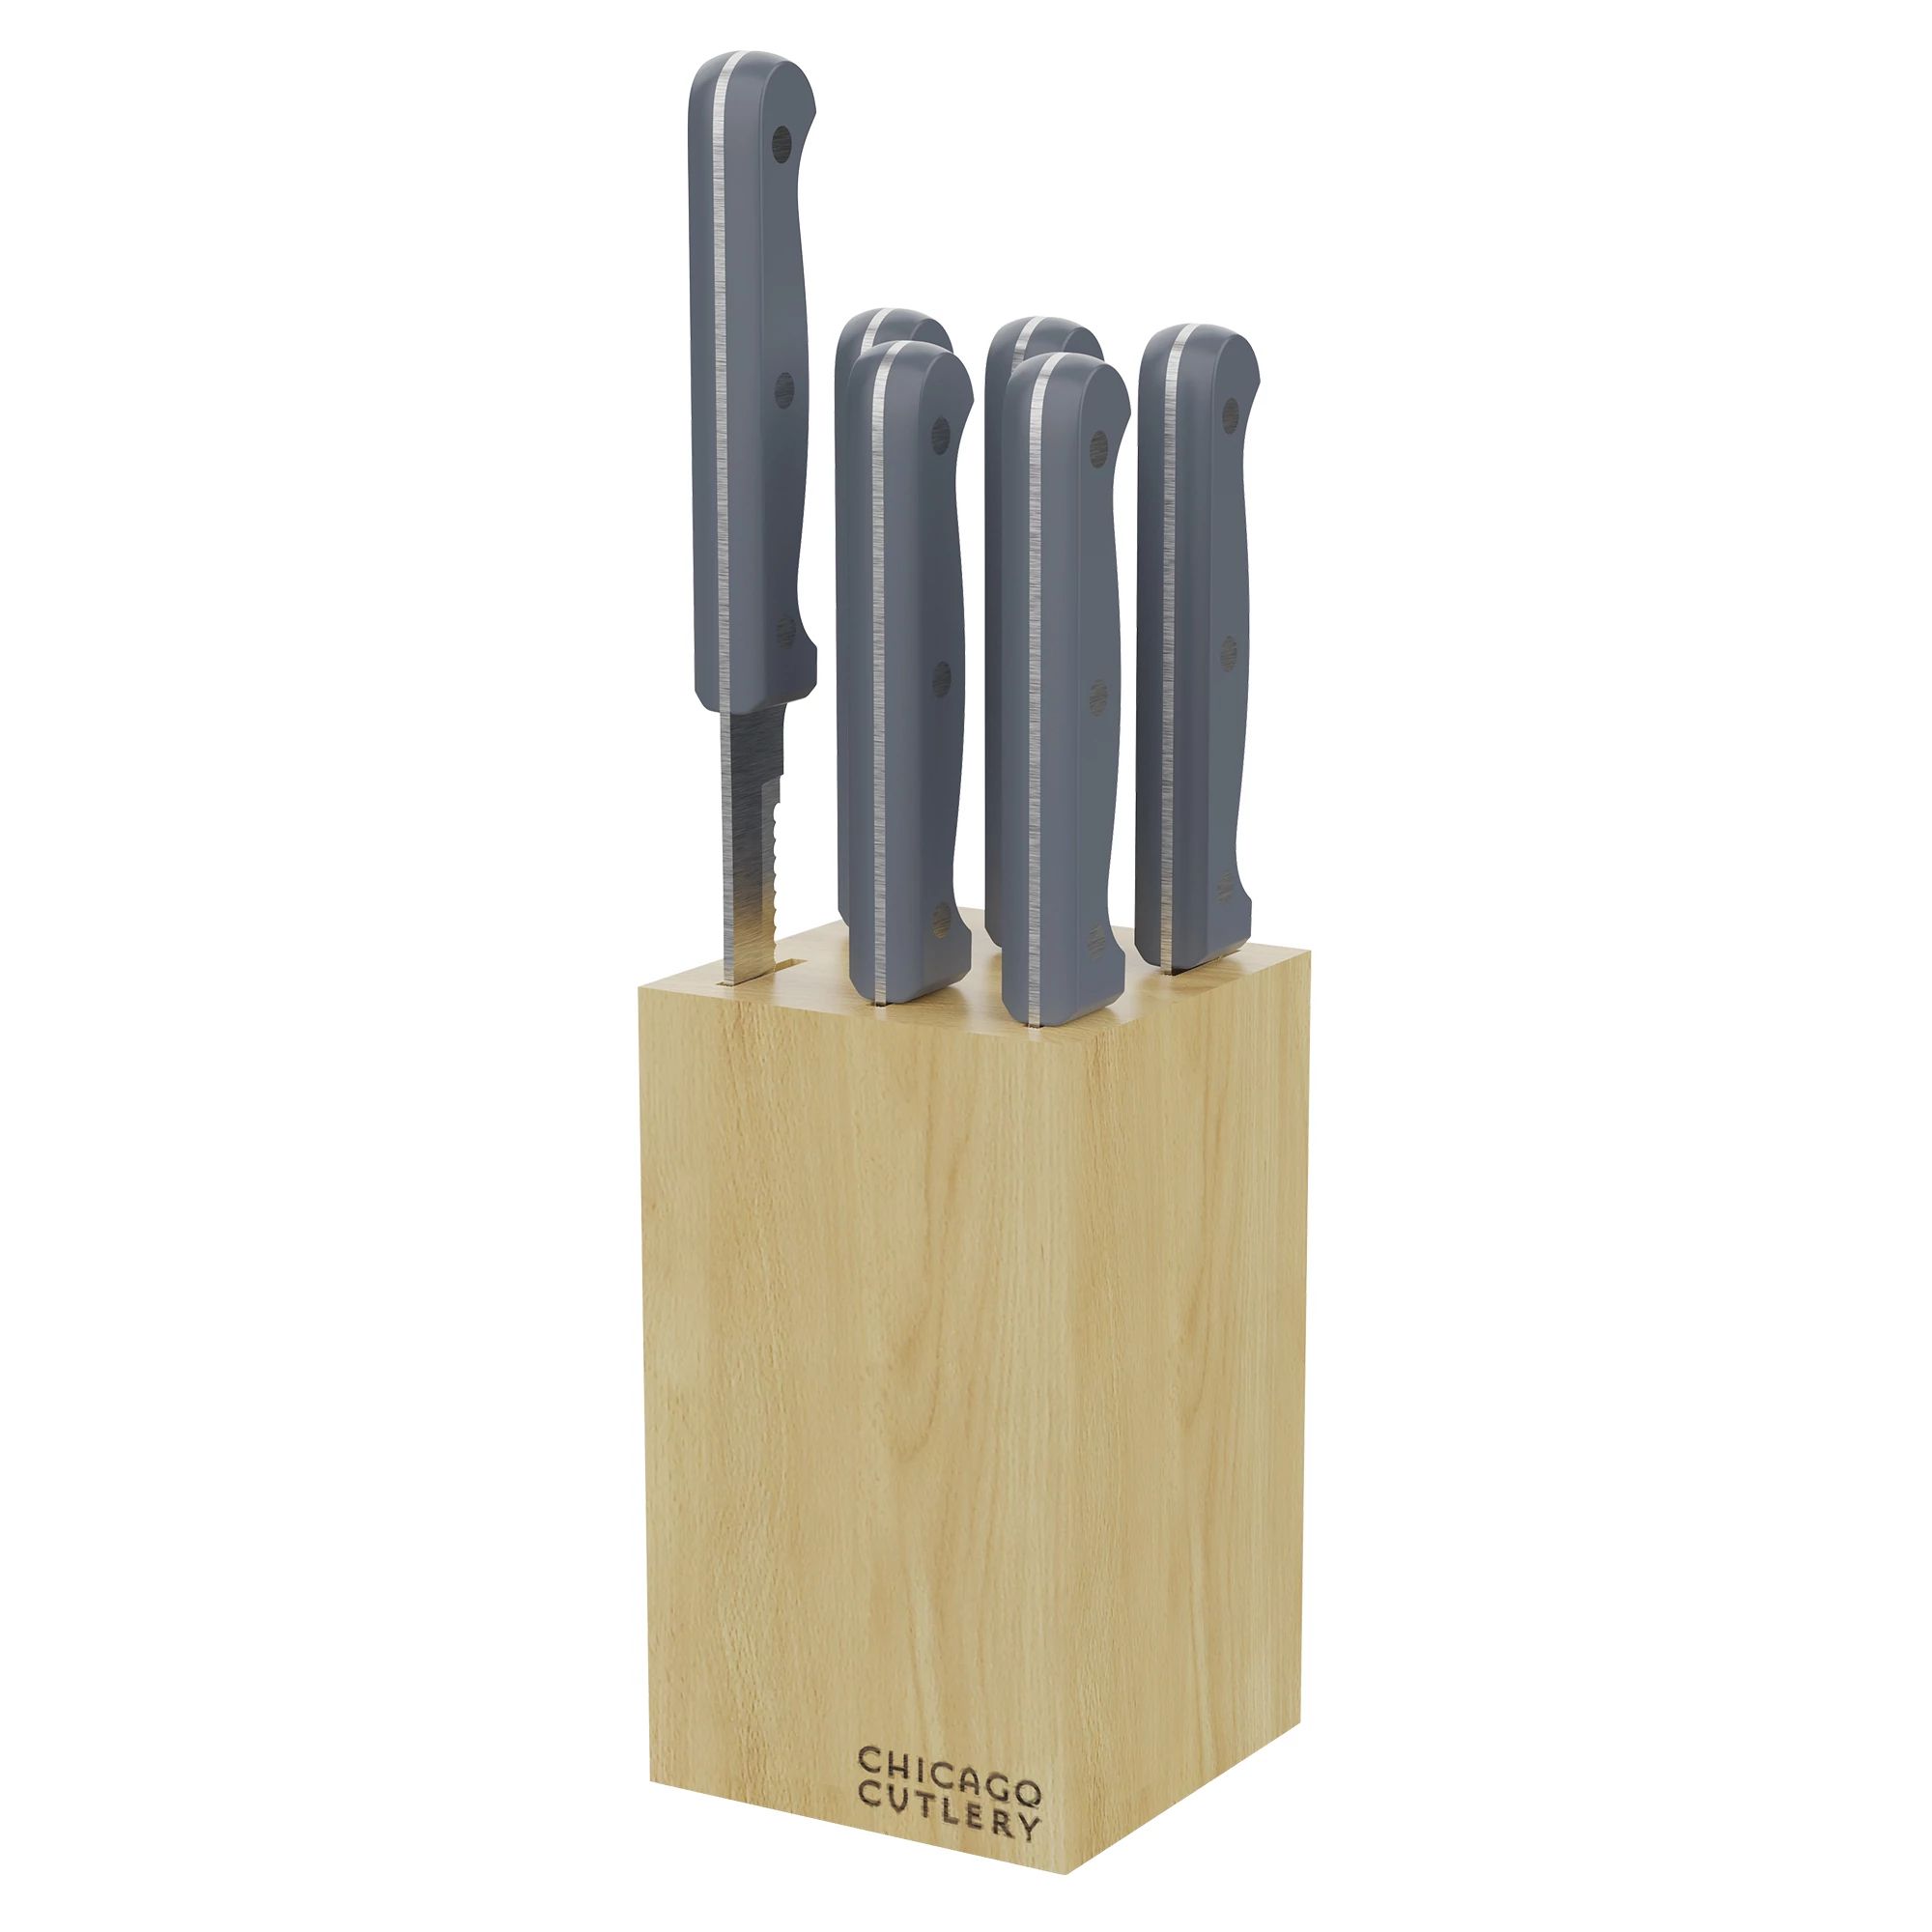 Chicago Cutlery Knife Set of 6. All Very Good Condition.